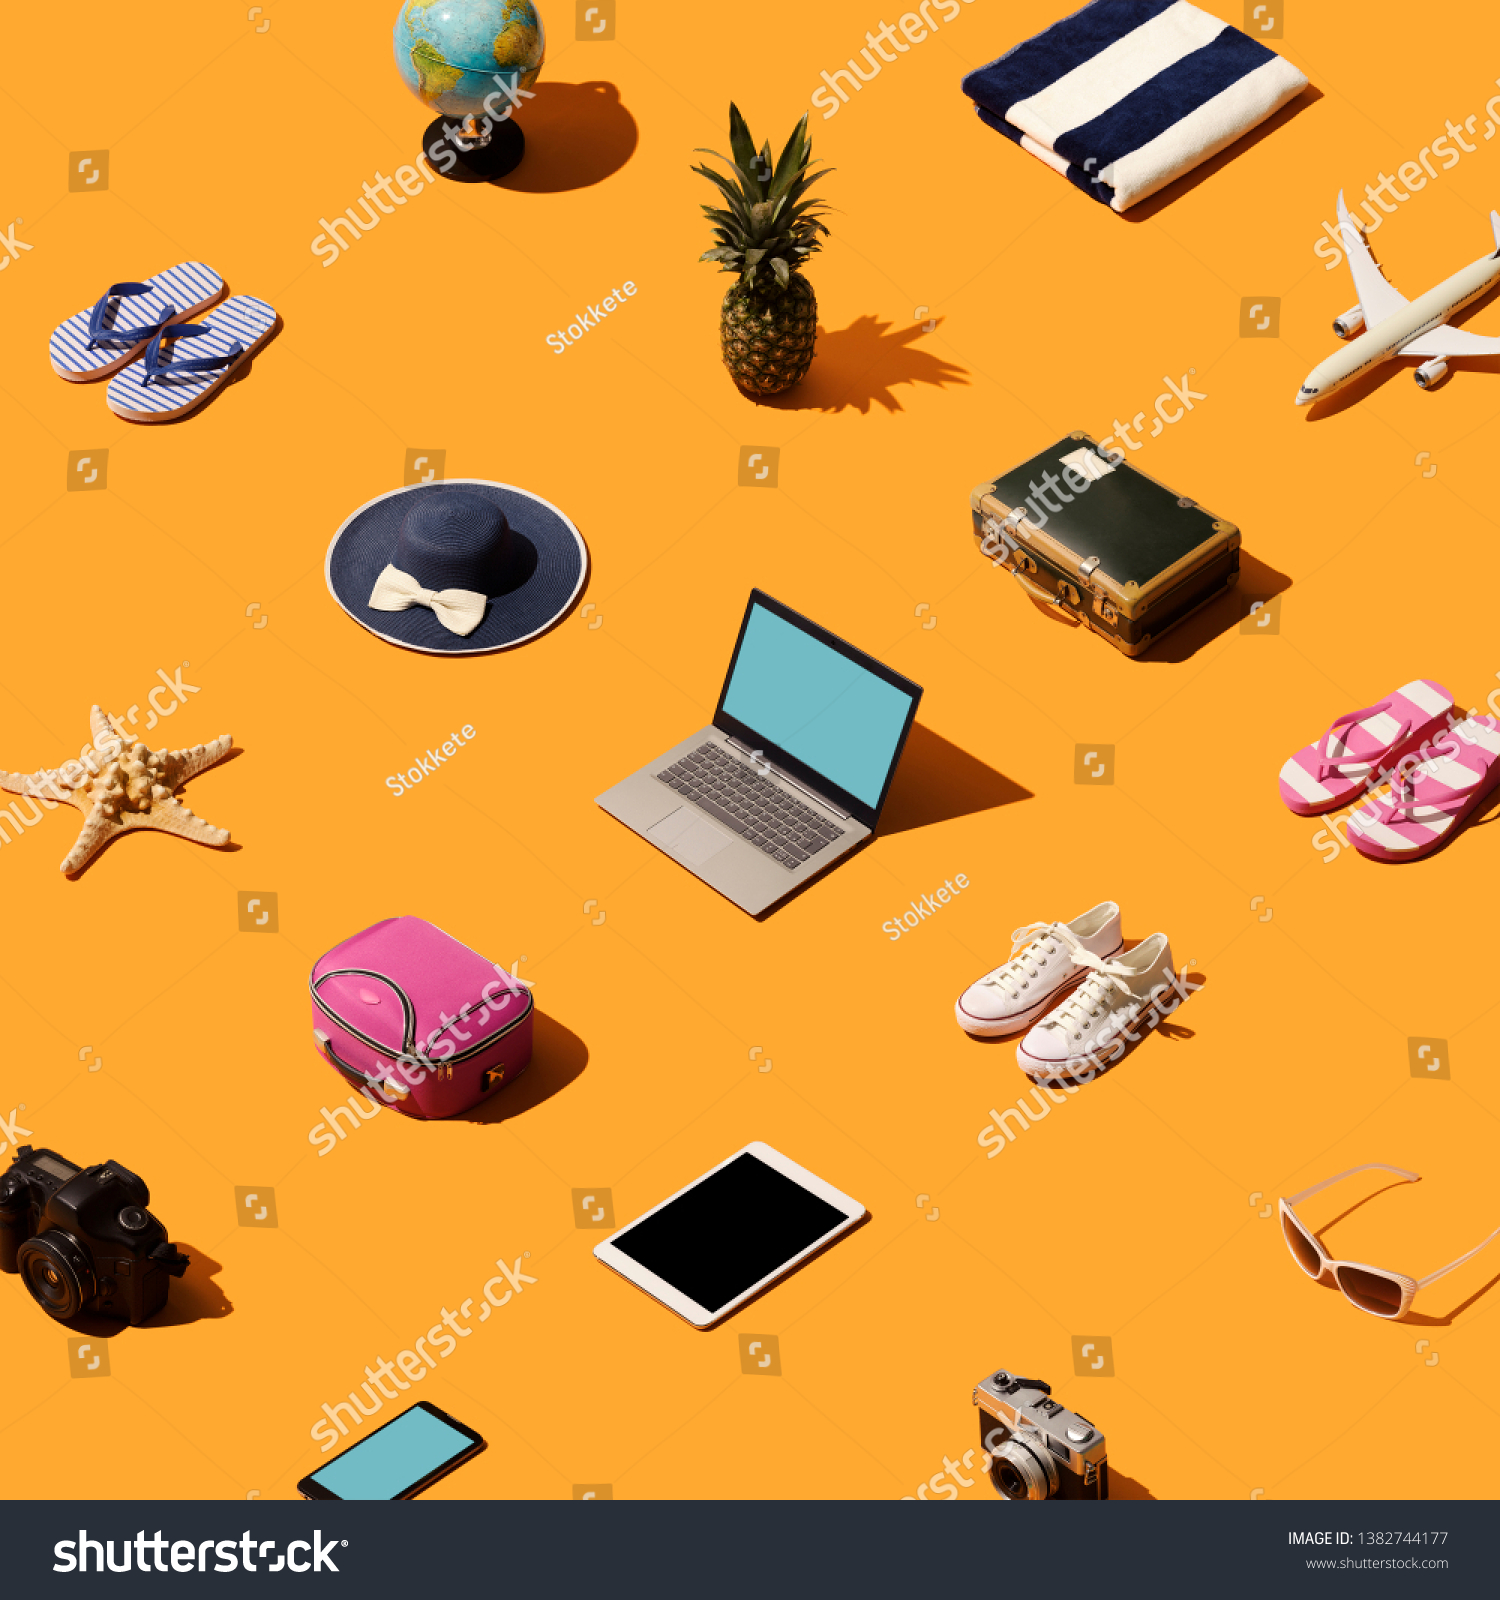 Travel, vacations and tourism background with isometric objects and accessories #1382744177